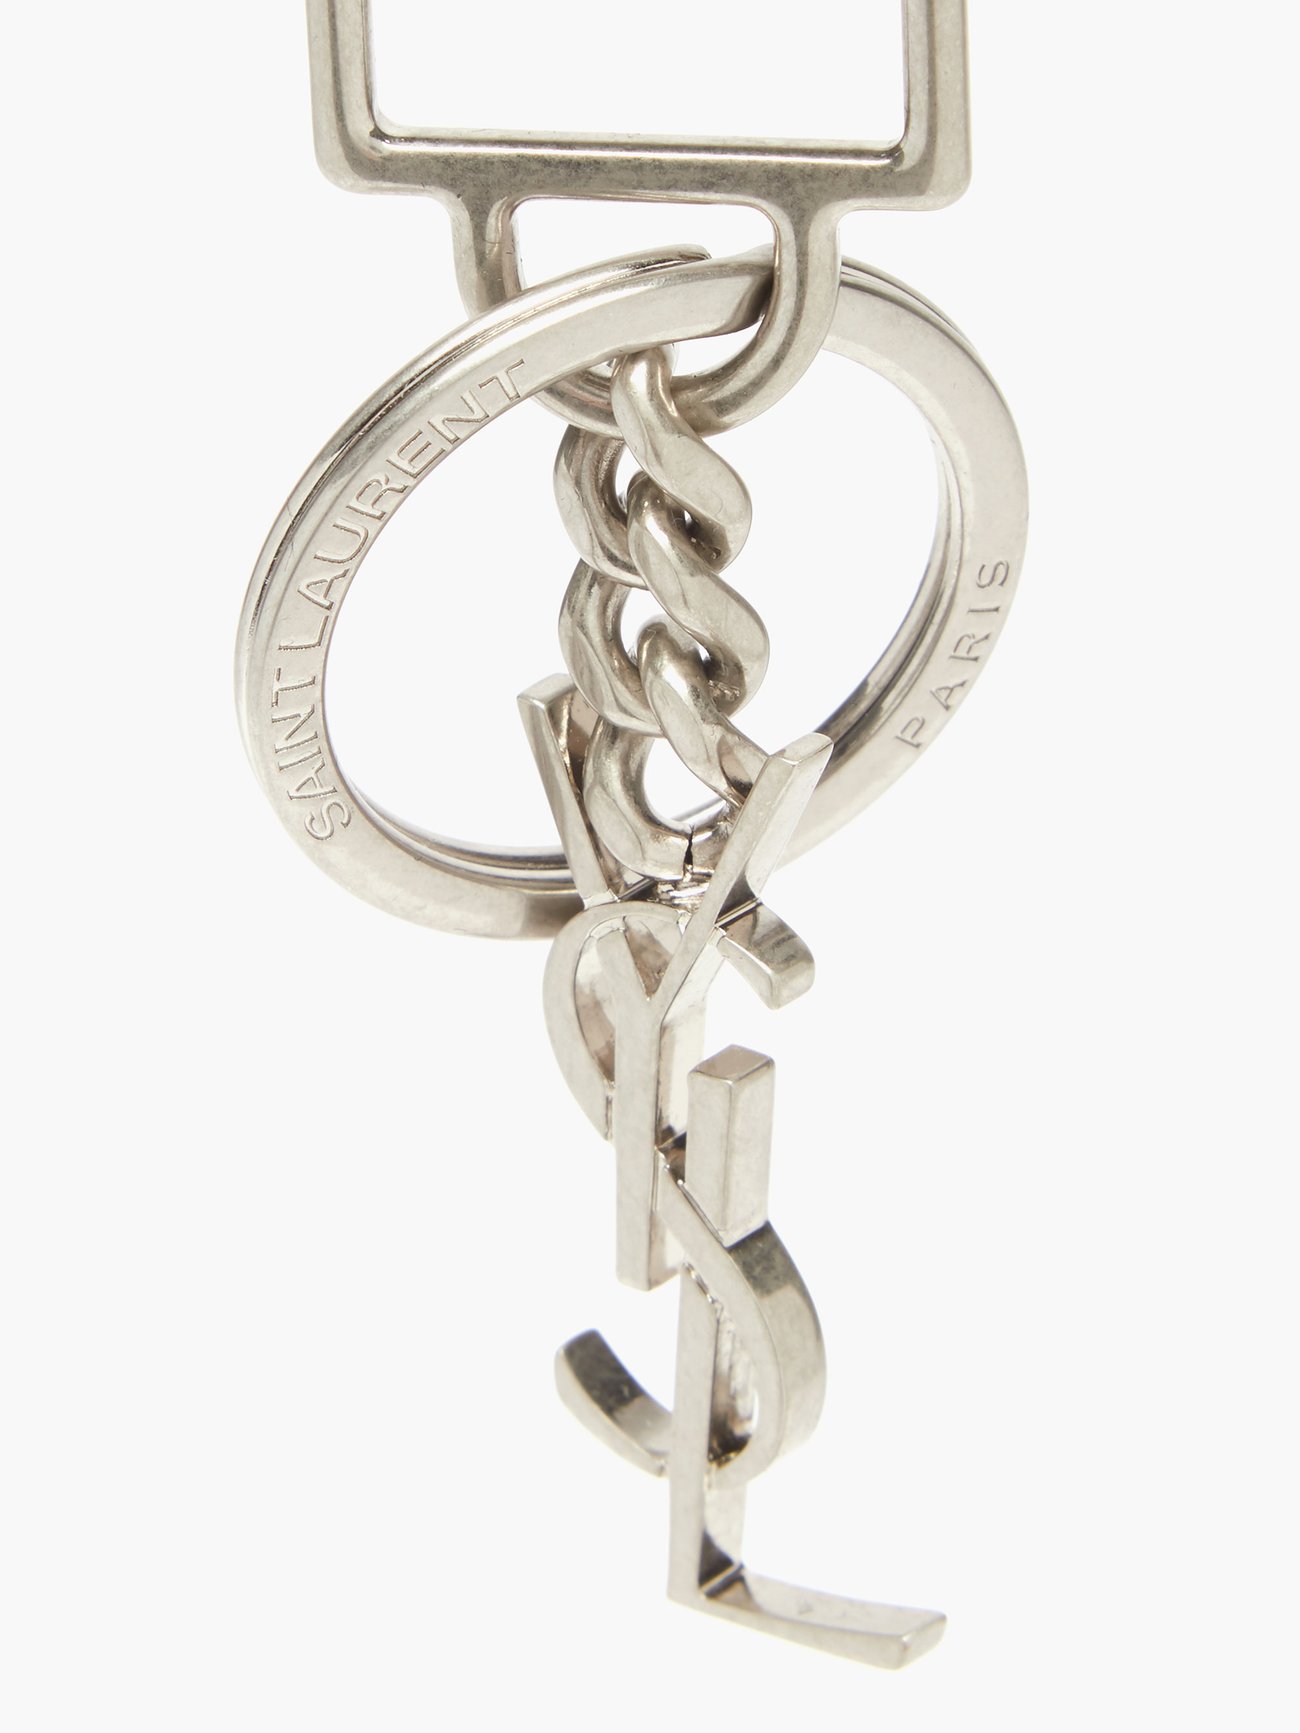 Shop Saint Laurent MONOGRAM KEY RING IN SMOOTH LEATHER